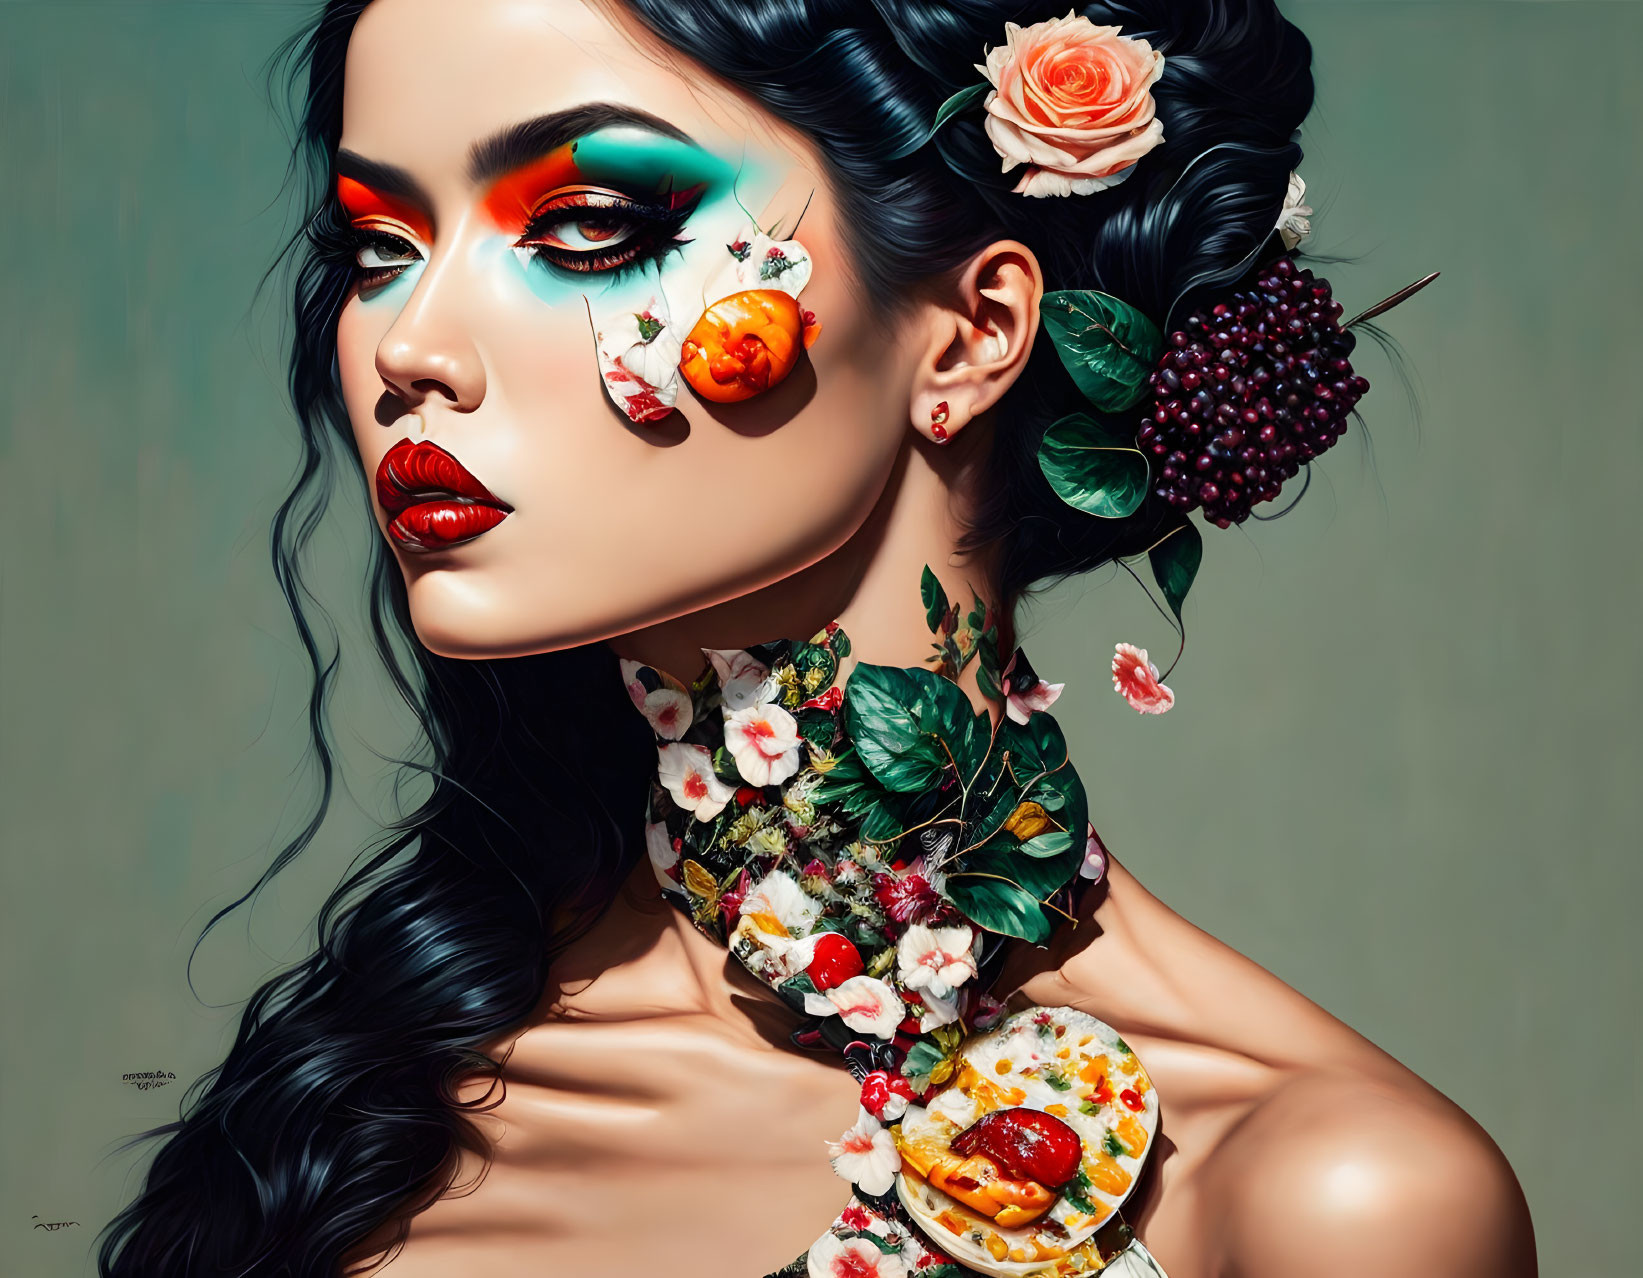 Illustrated woman with fruit and floral makeup details.